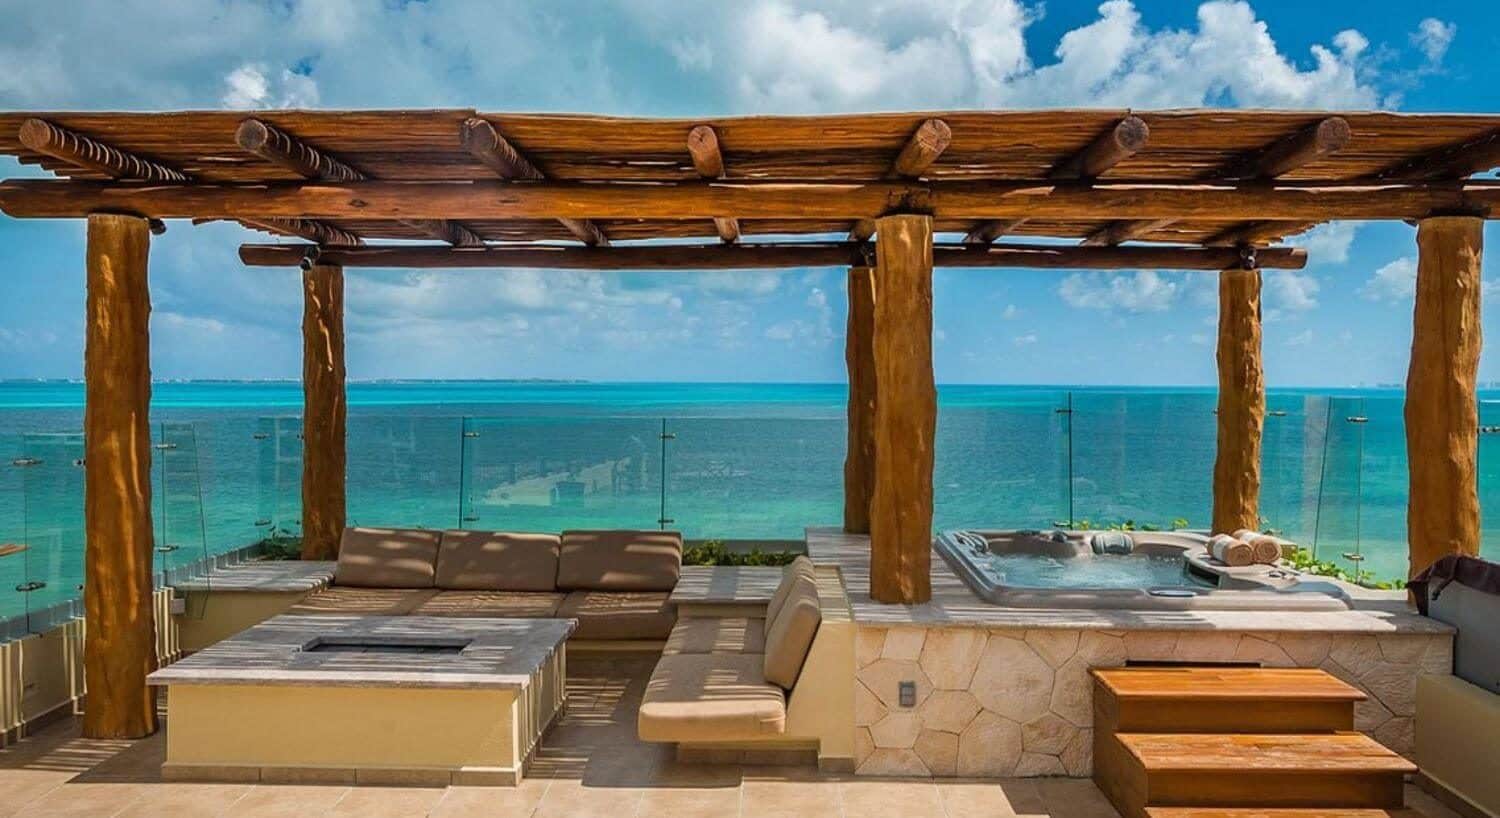 An outdoor living area with couches, a firepit and a hot tub, with a pergola roof and sweeping turquoise ocean views.